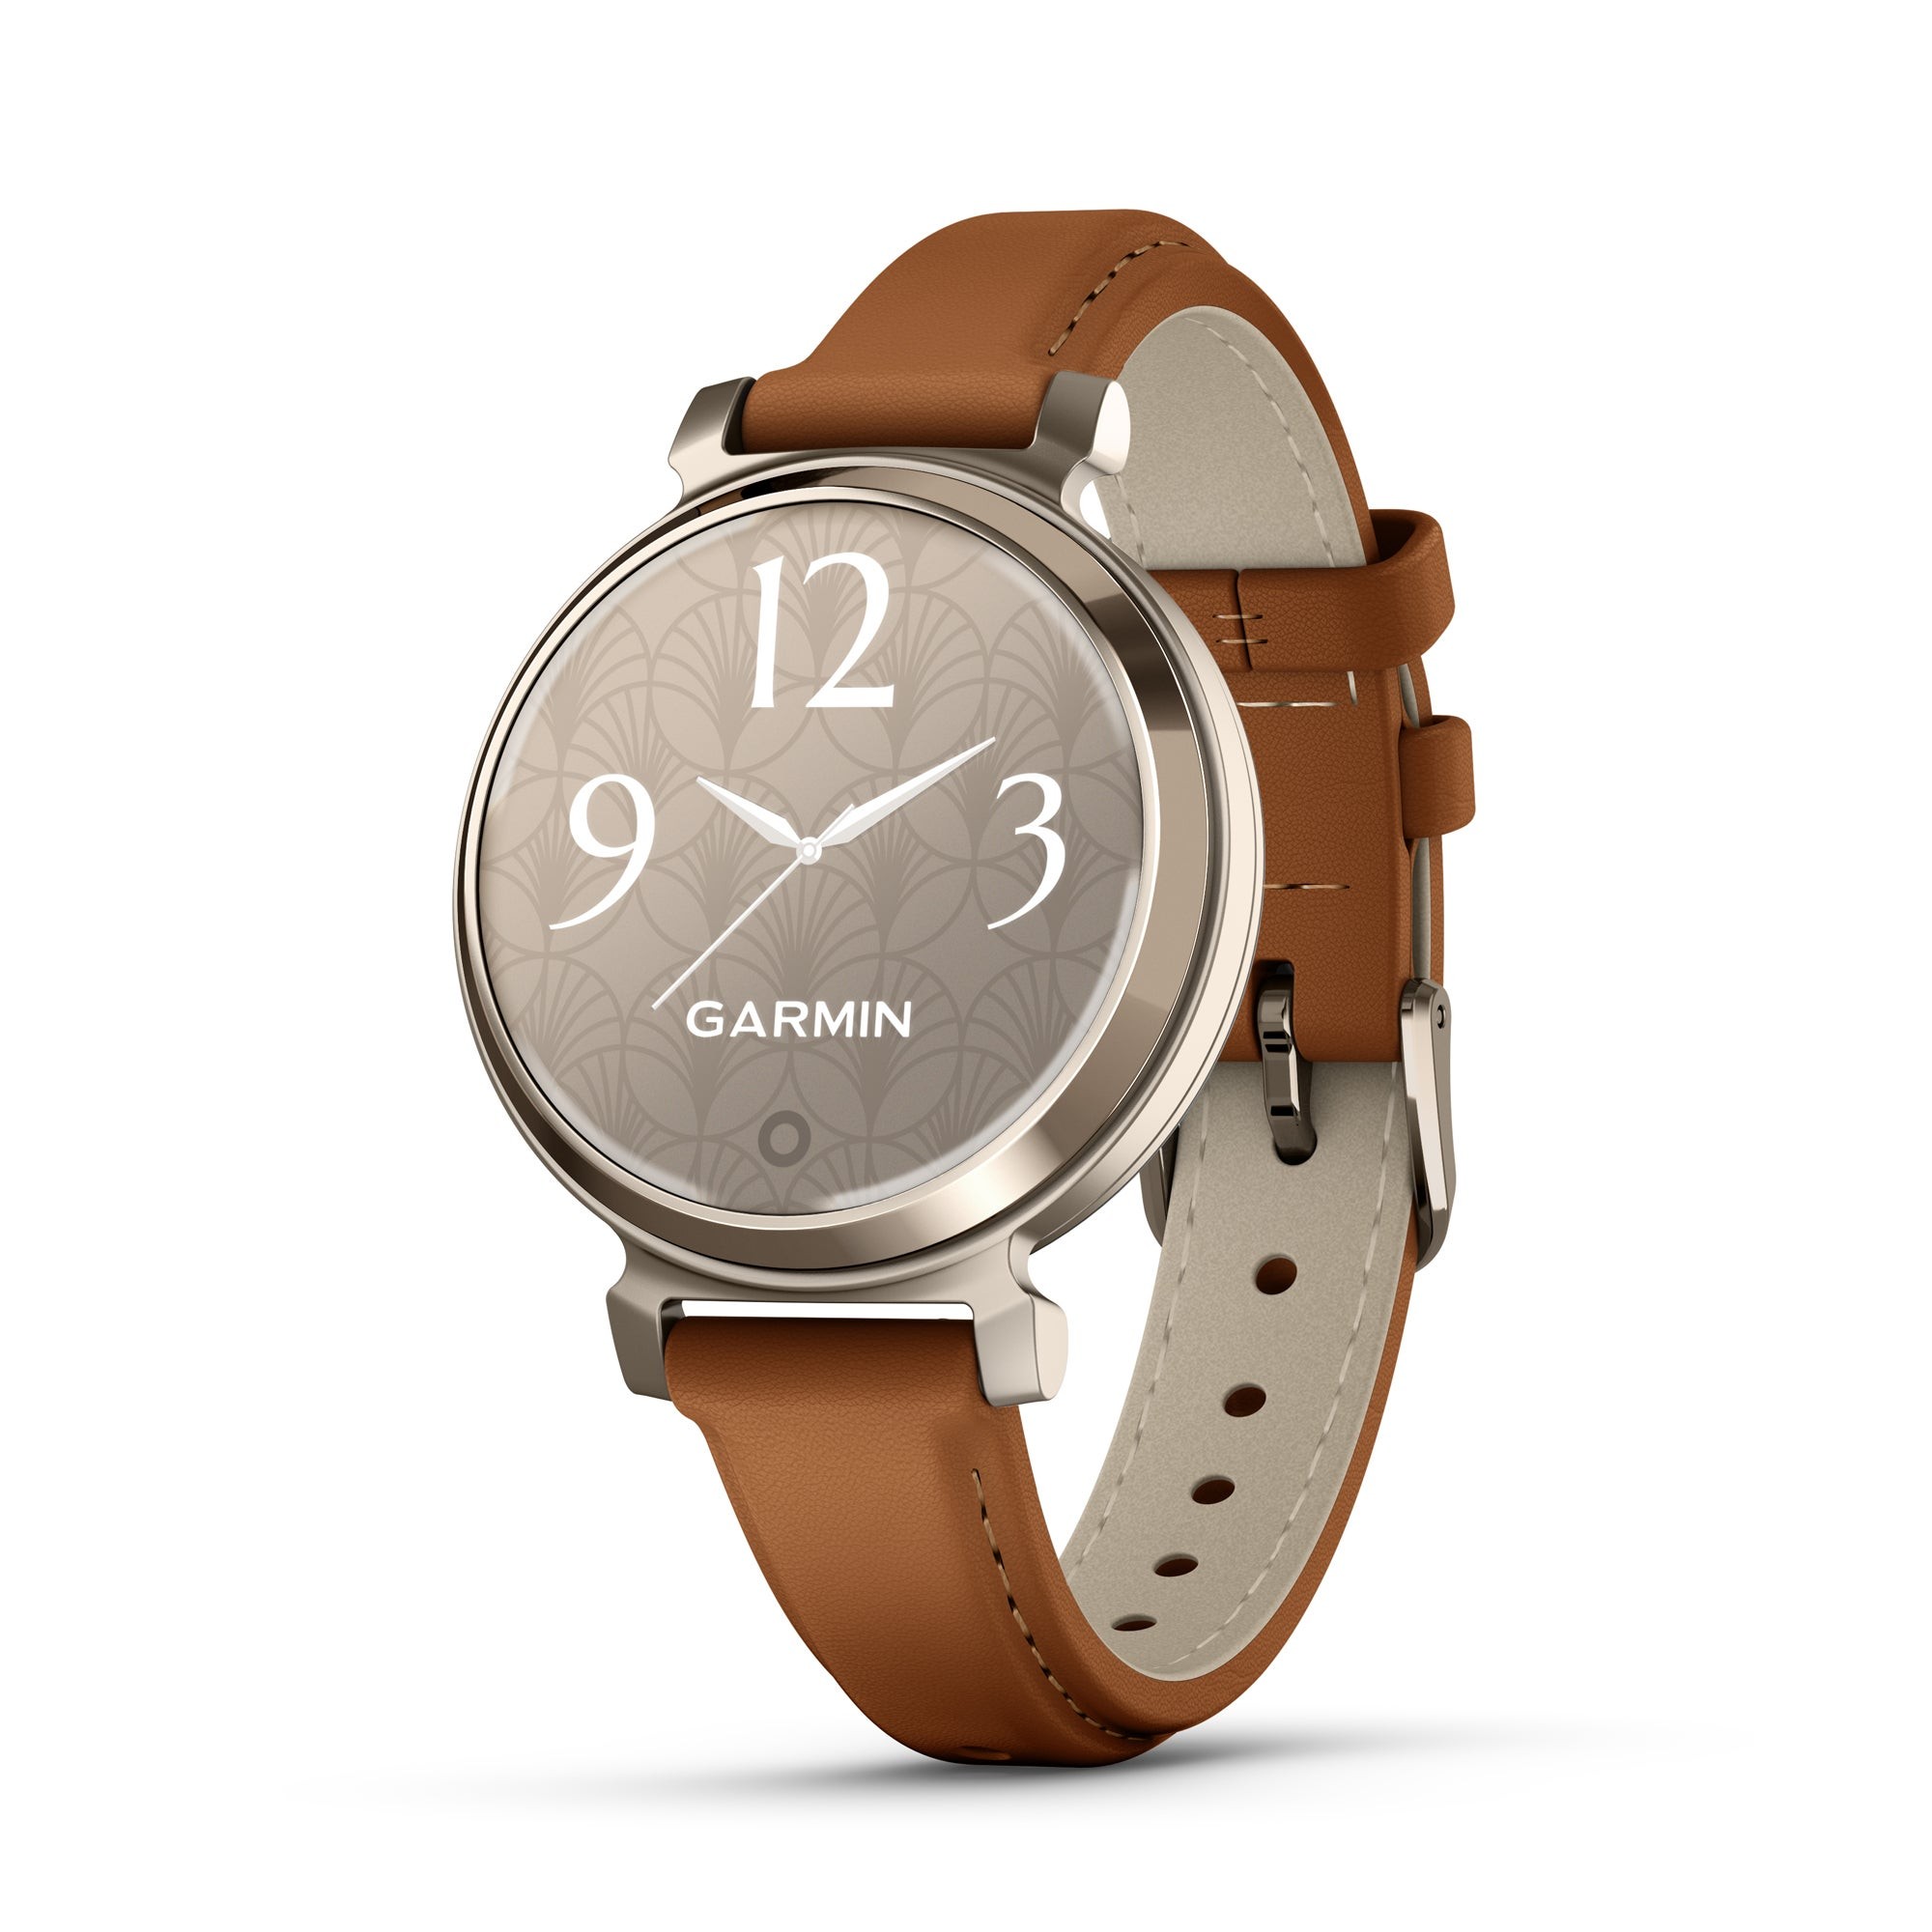 Lily 2 Classic Smartwatch Cream Gold w/ Tan Leather Band